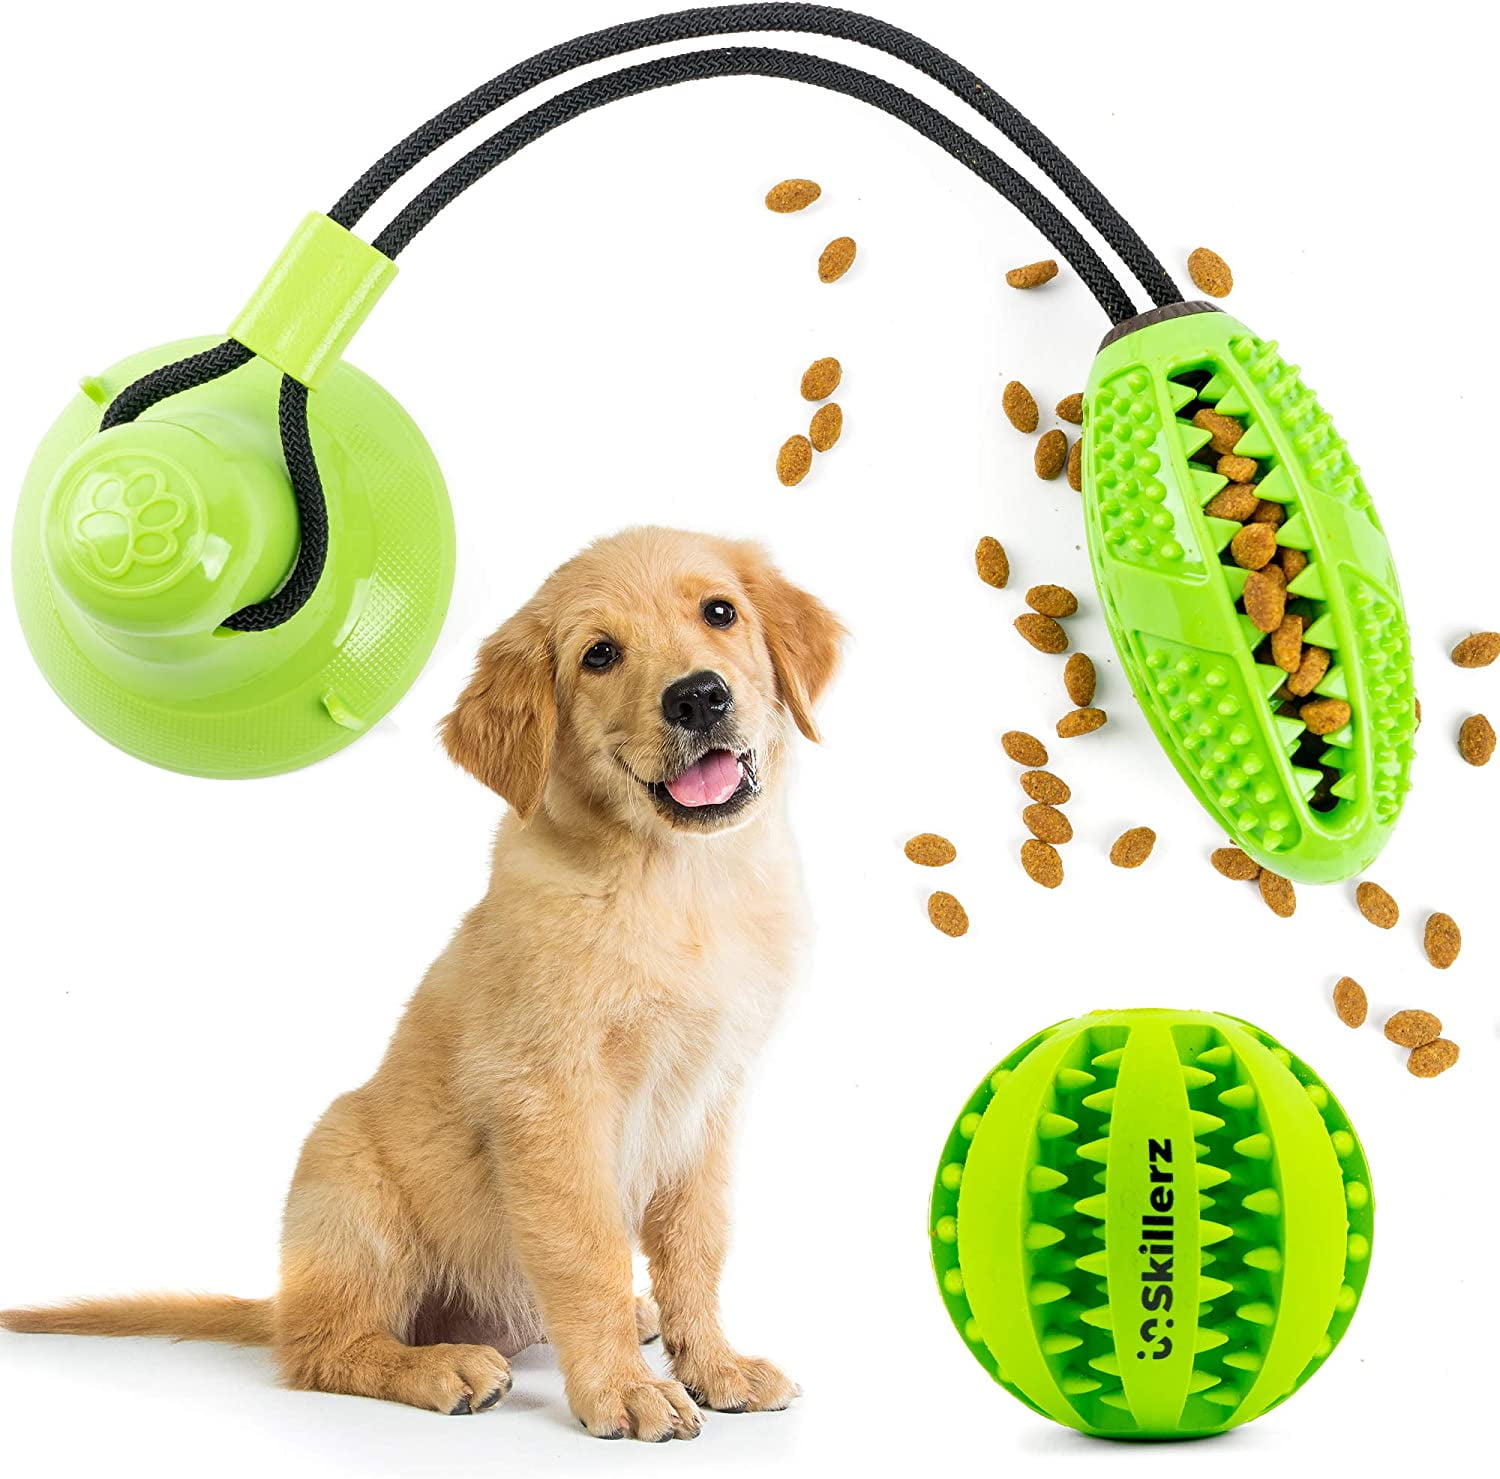 Dog Rope Toys Set Puppy Chew Teething Rope Toys Set of 7 Durable Dog Toys for Playing Playtime and Teeth Cleaning Training 